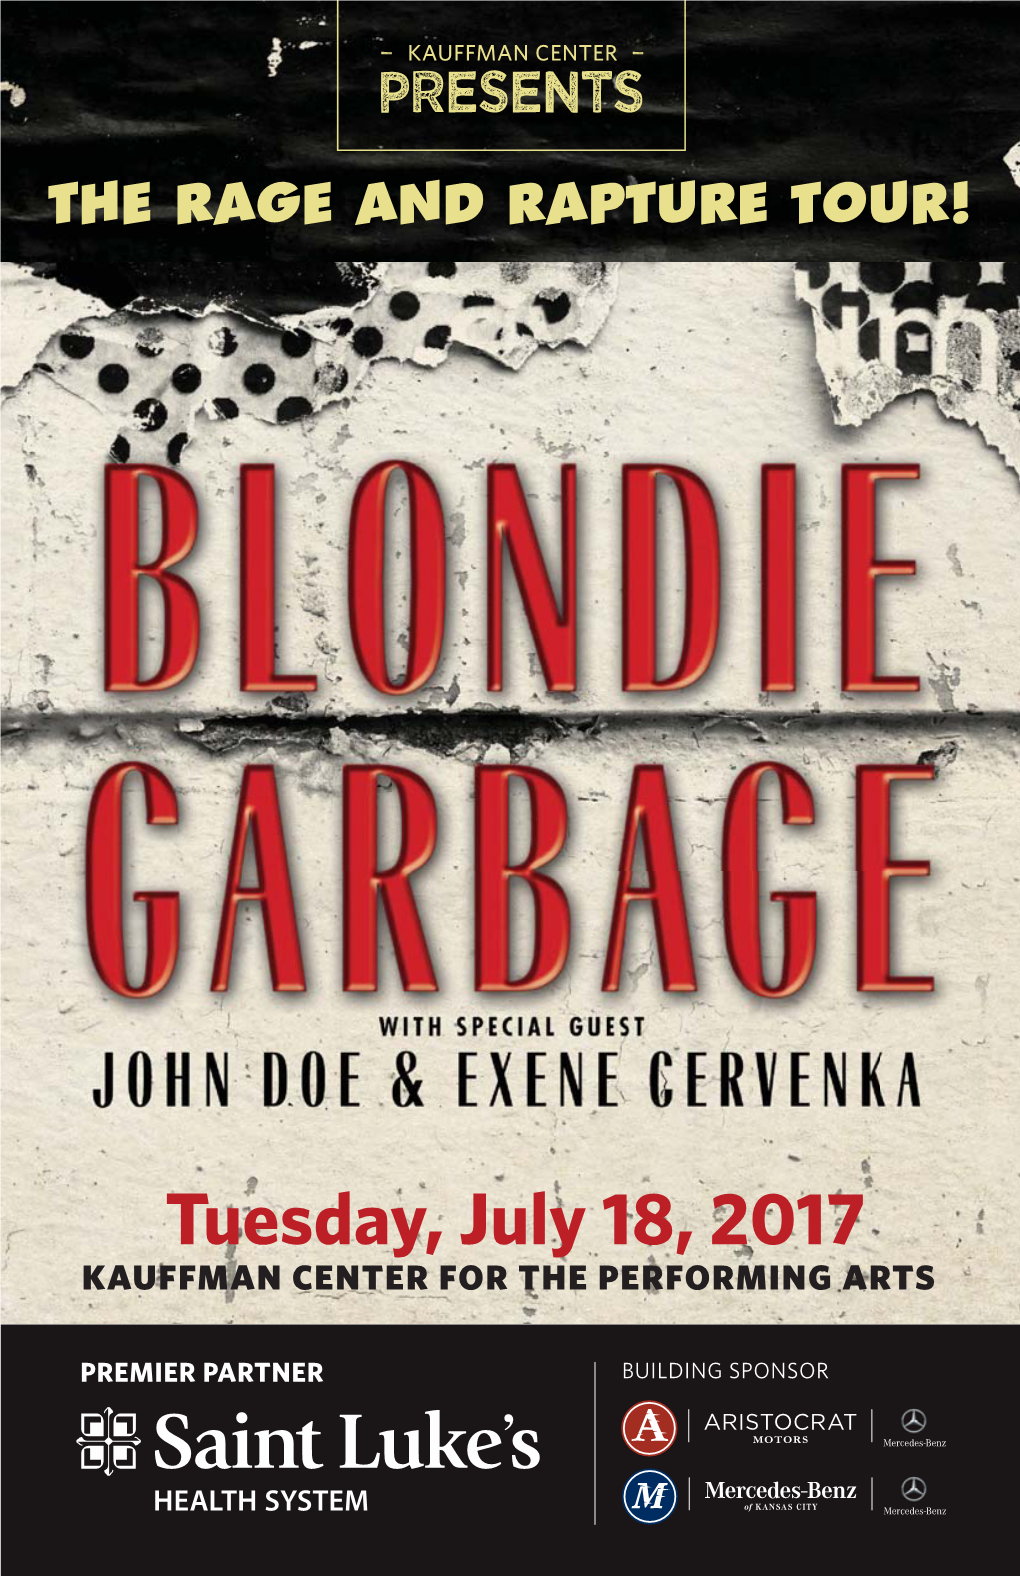 Tuesday, July 18, 2017 KAUFFMAN CENTER for the PERFORMING ARTS